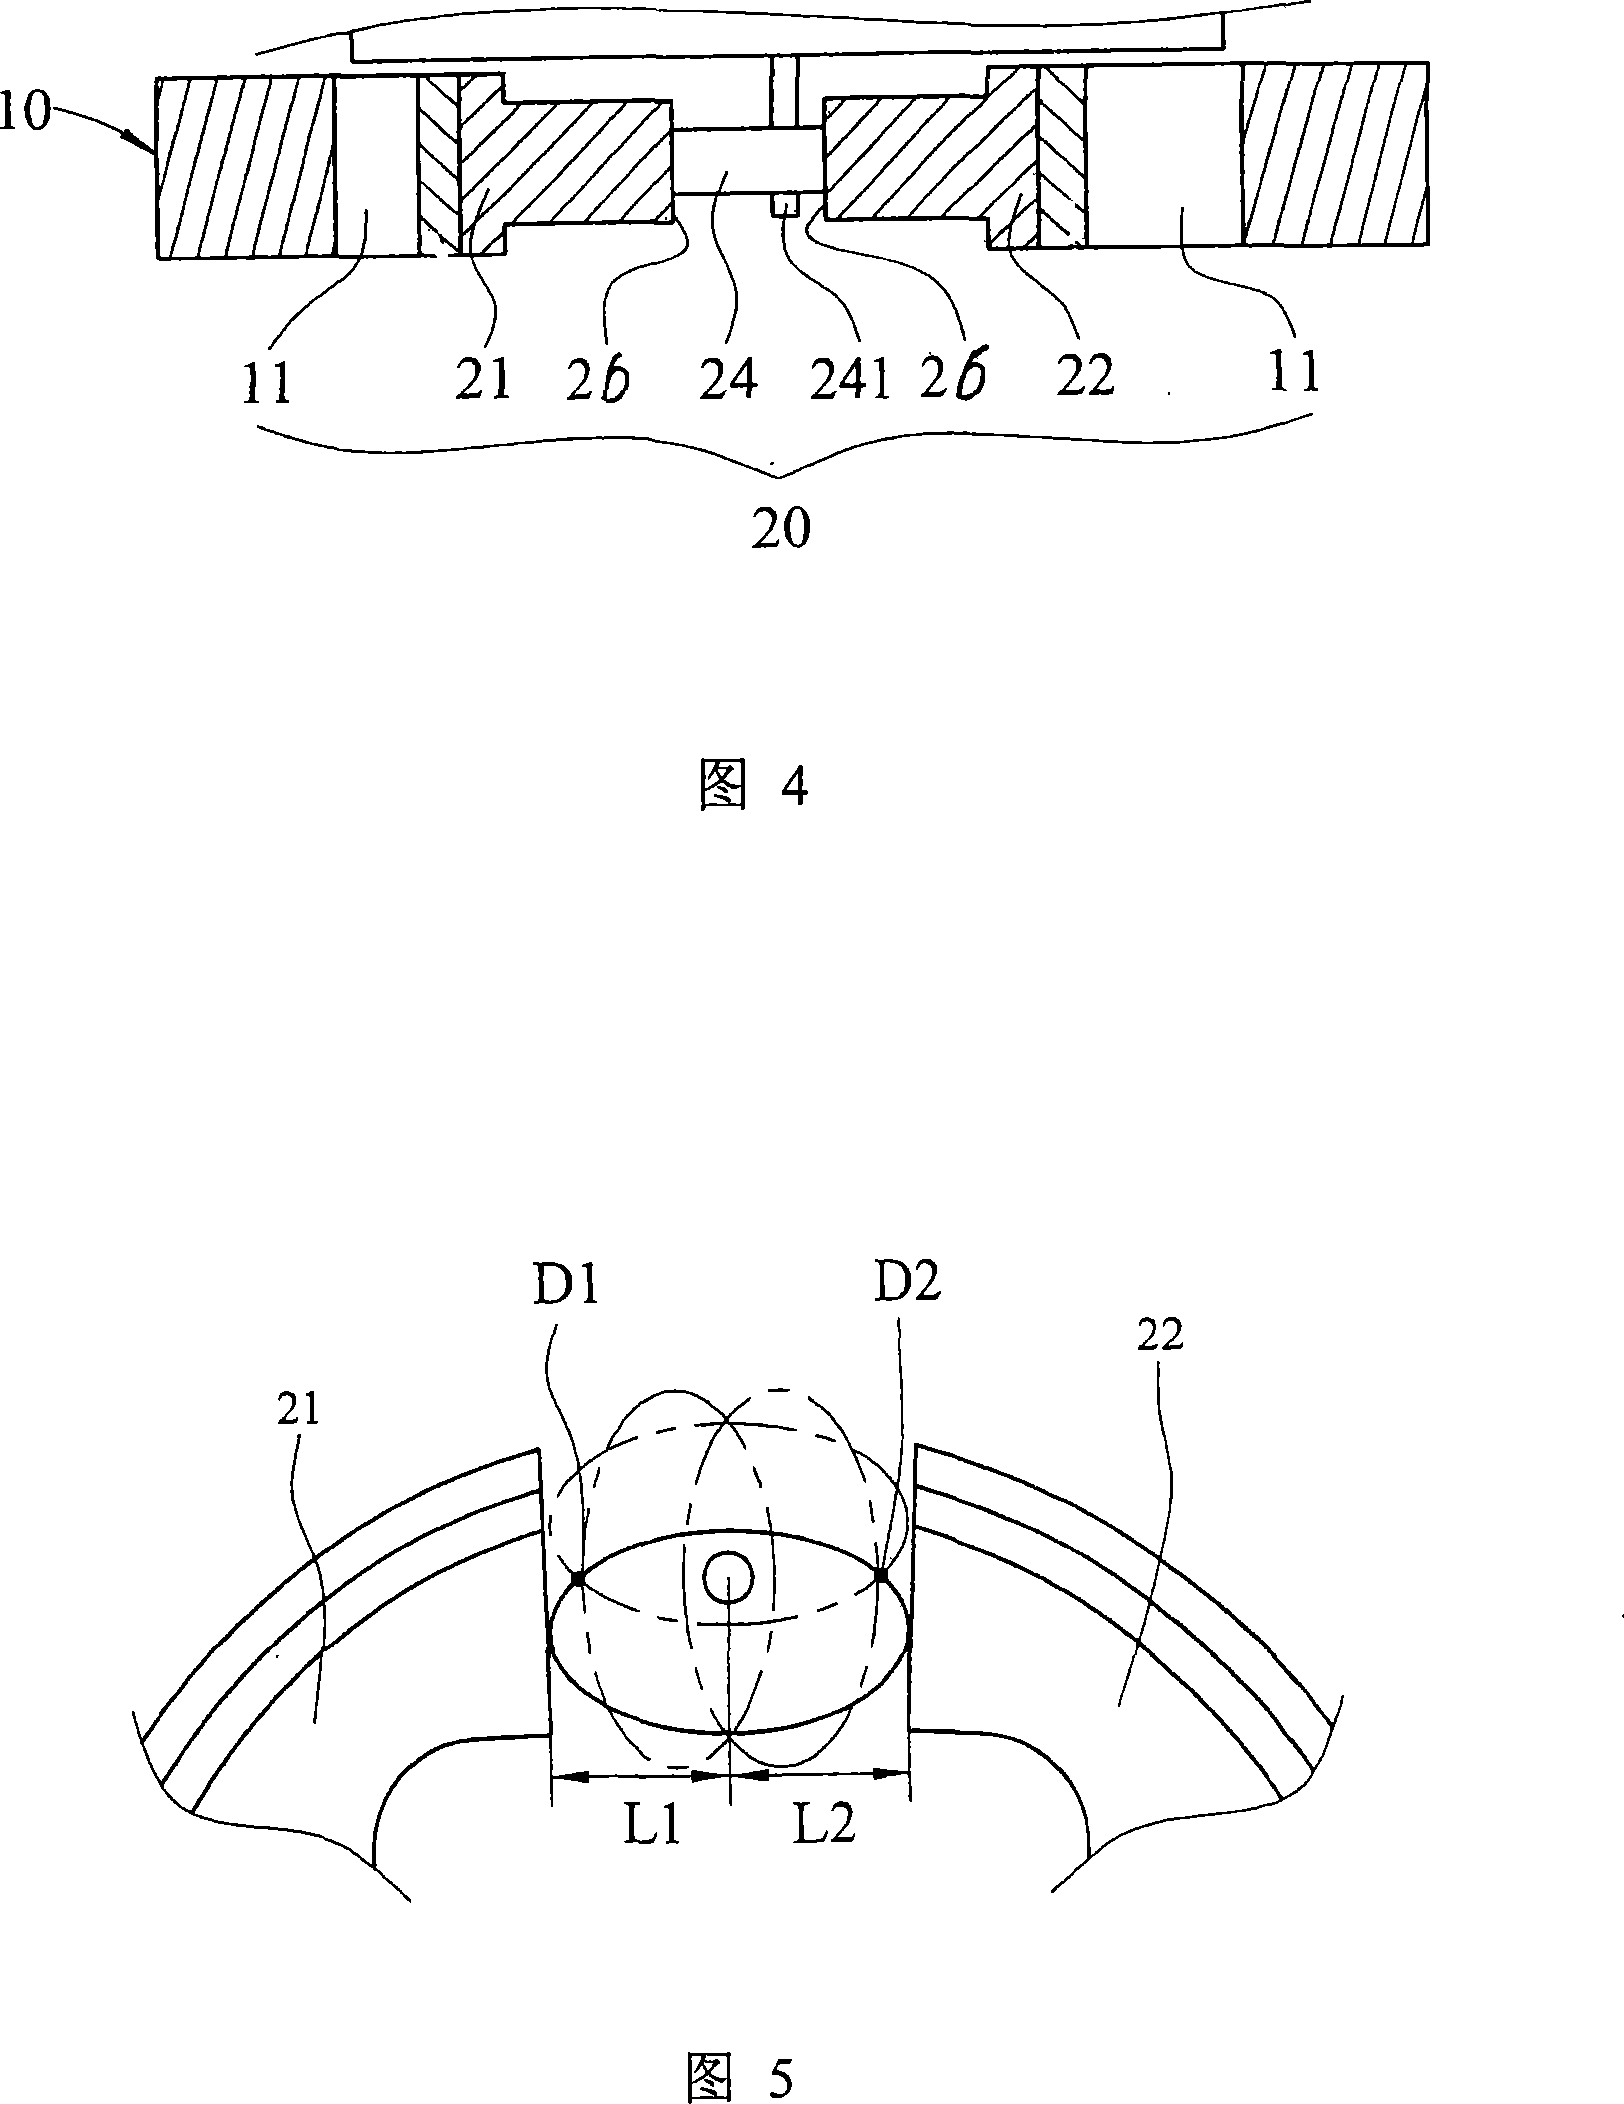 Section speed reducing magnetic control system for sports appliance